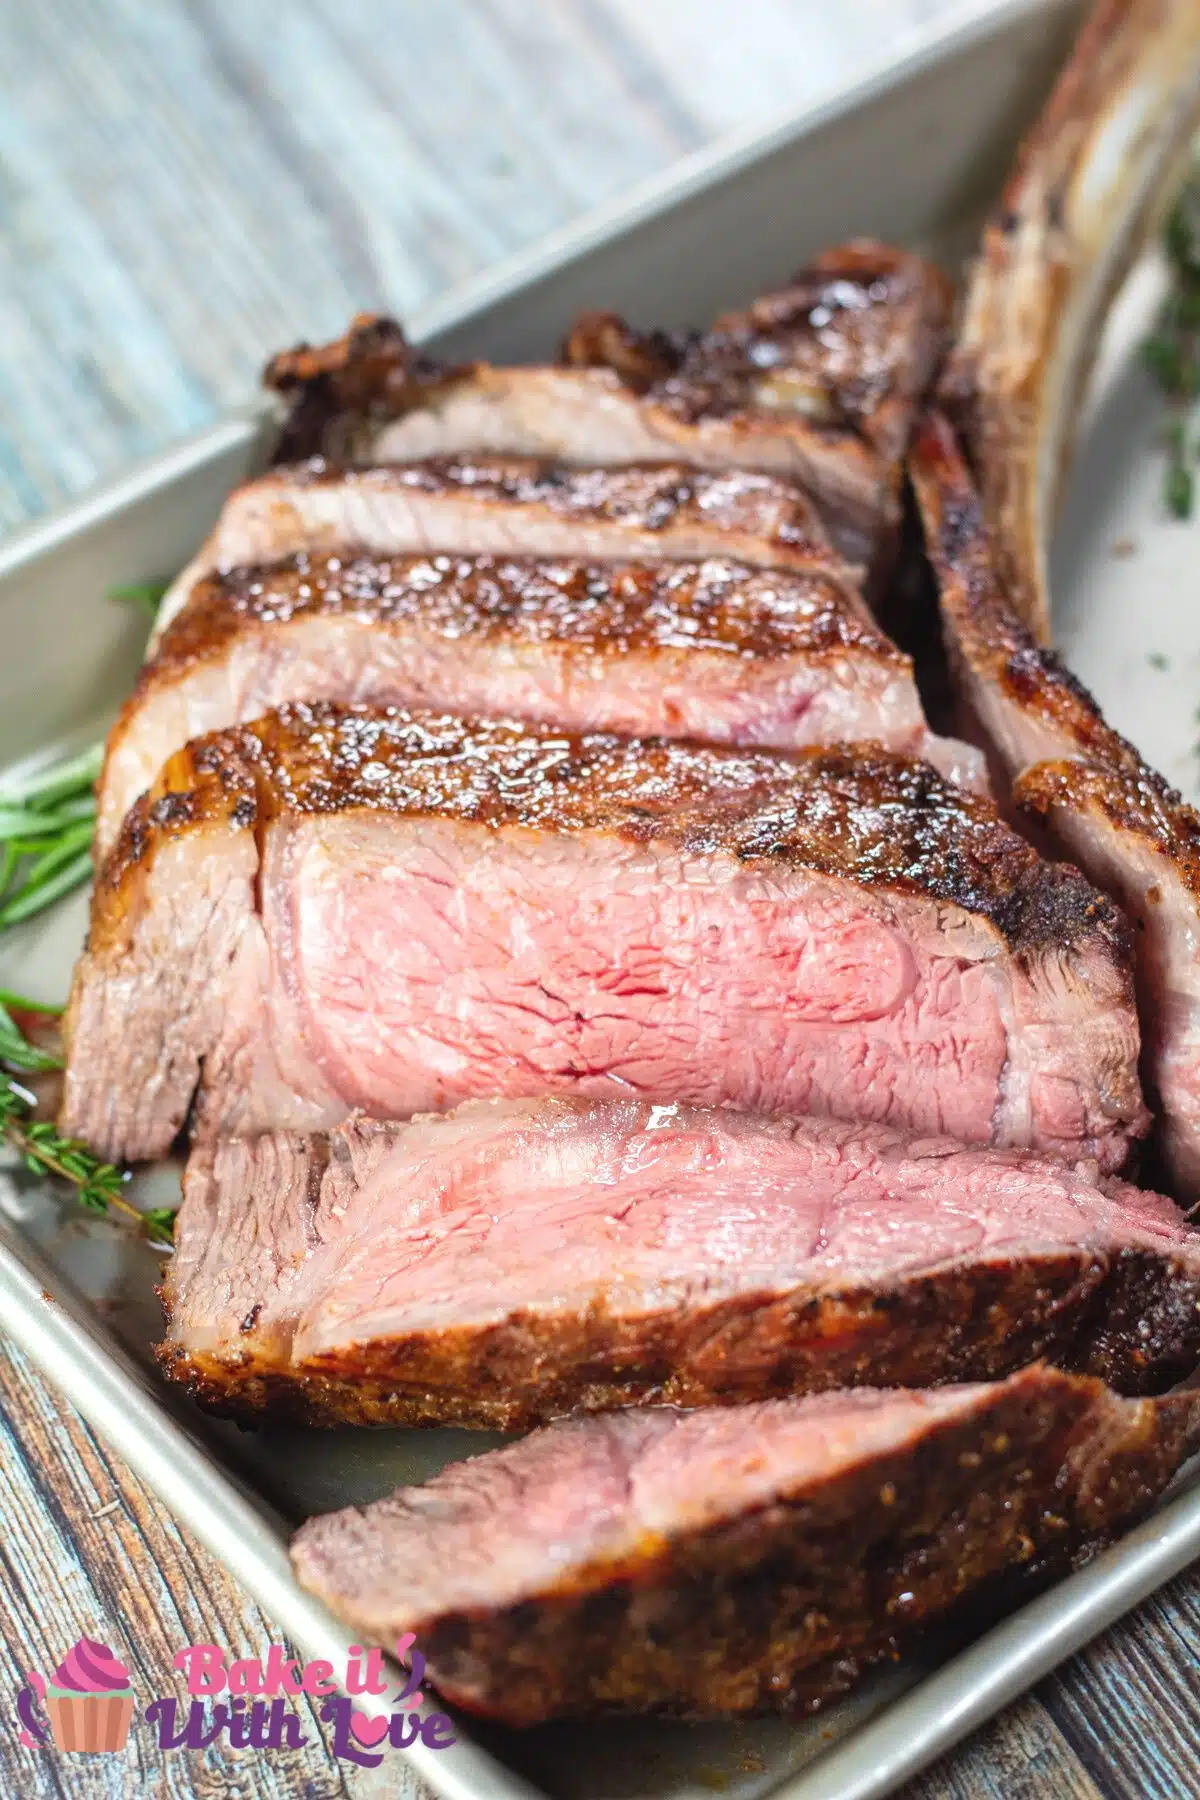 Tall image showing grilled tomahawk ribeye.